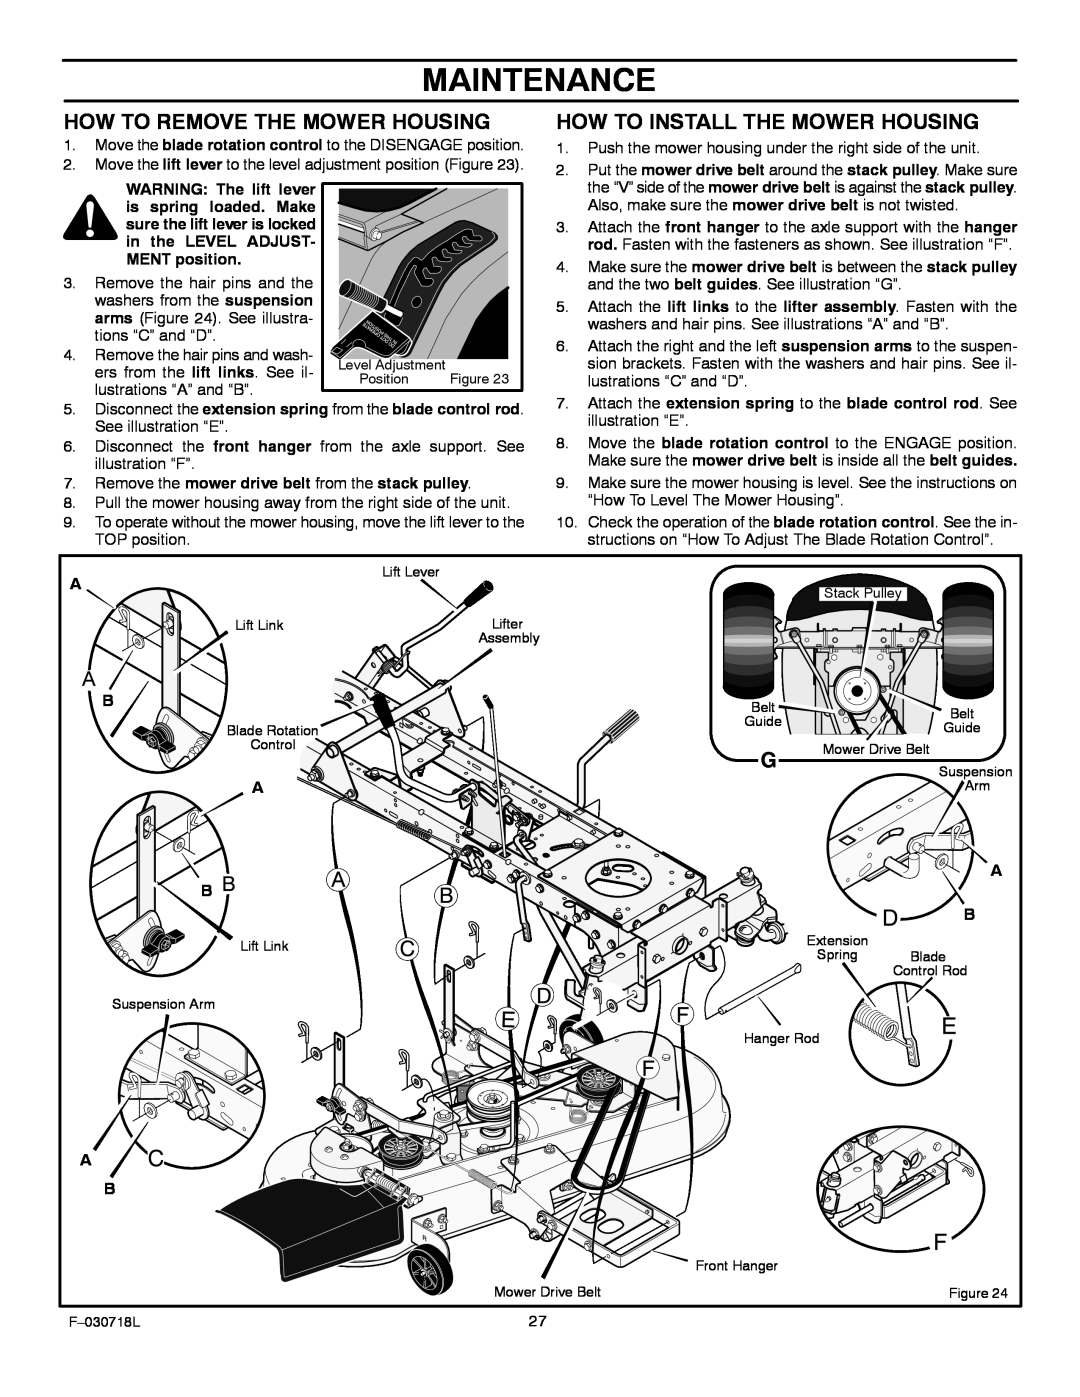 Murray 461000x8A manual Maintenance, How To Remove The Mower Housing, How To Install The Mower Housing, Suspension 